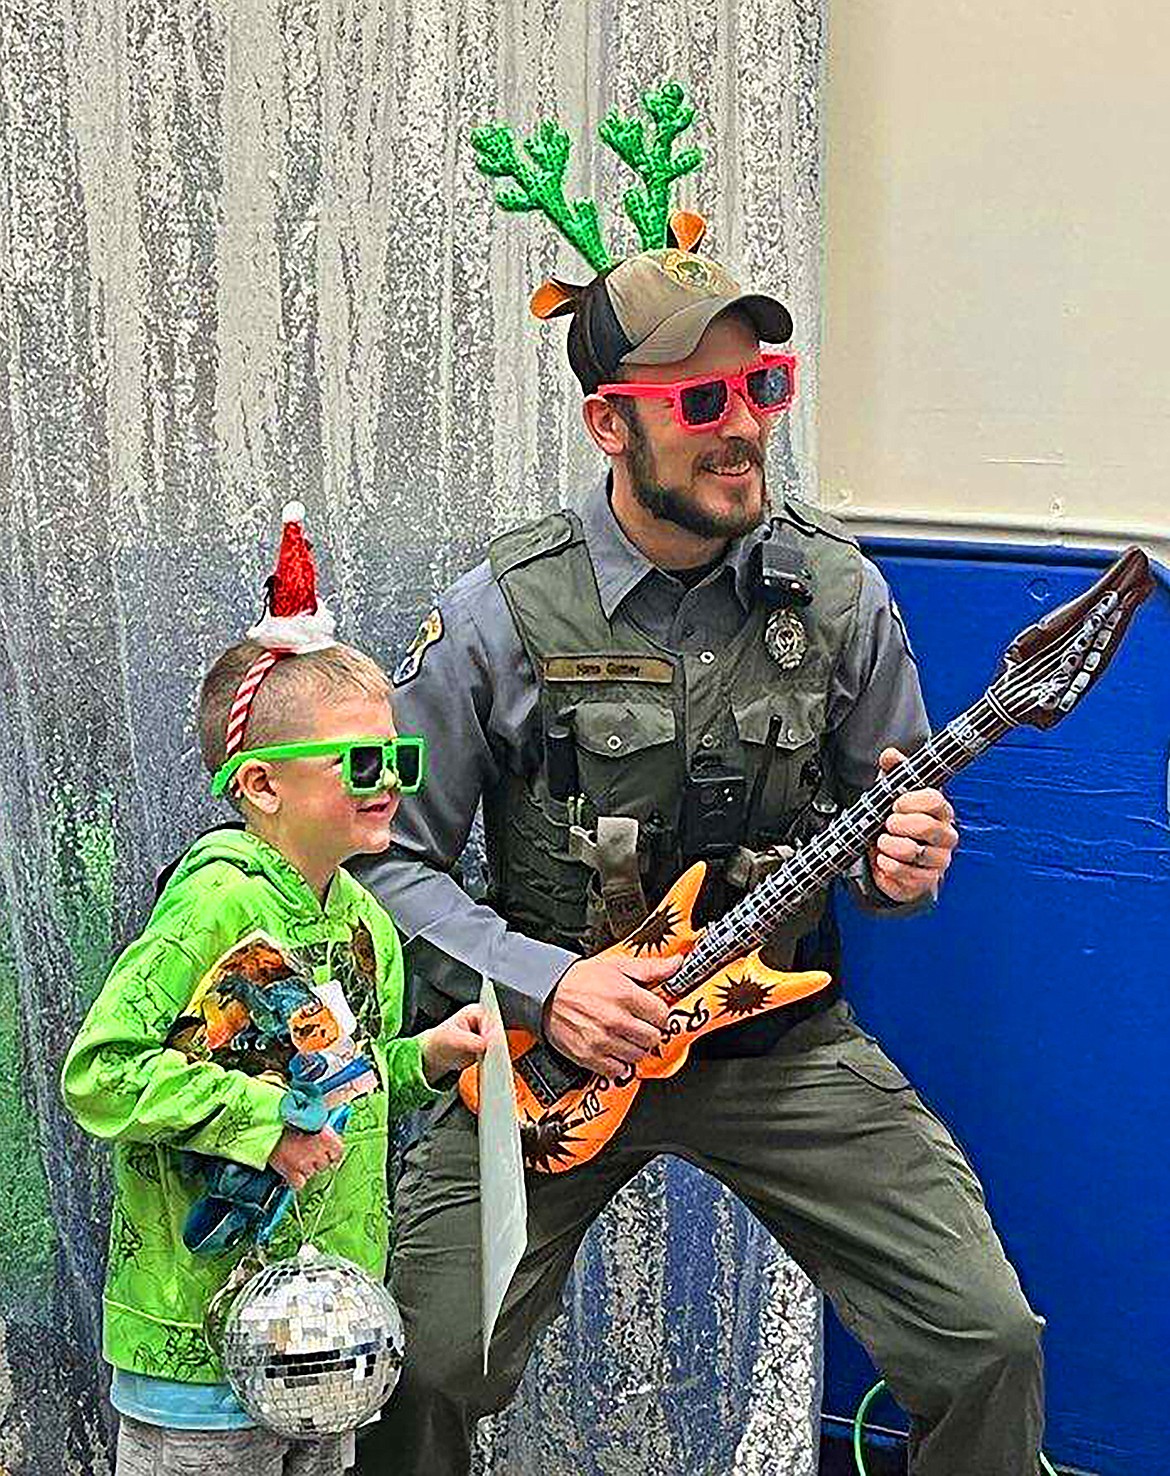 A local youth is pictured having fun mugging for the camera at the photo booth along with a local law enforcement officer during the recent "Shop With a Cop" event.